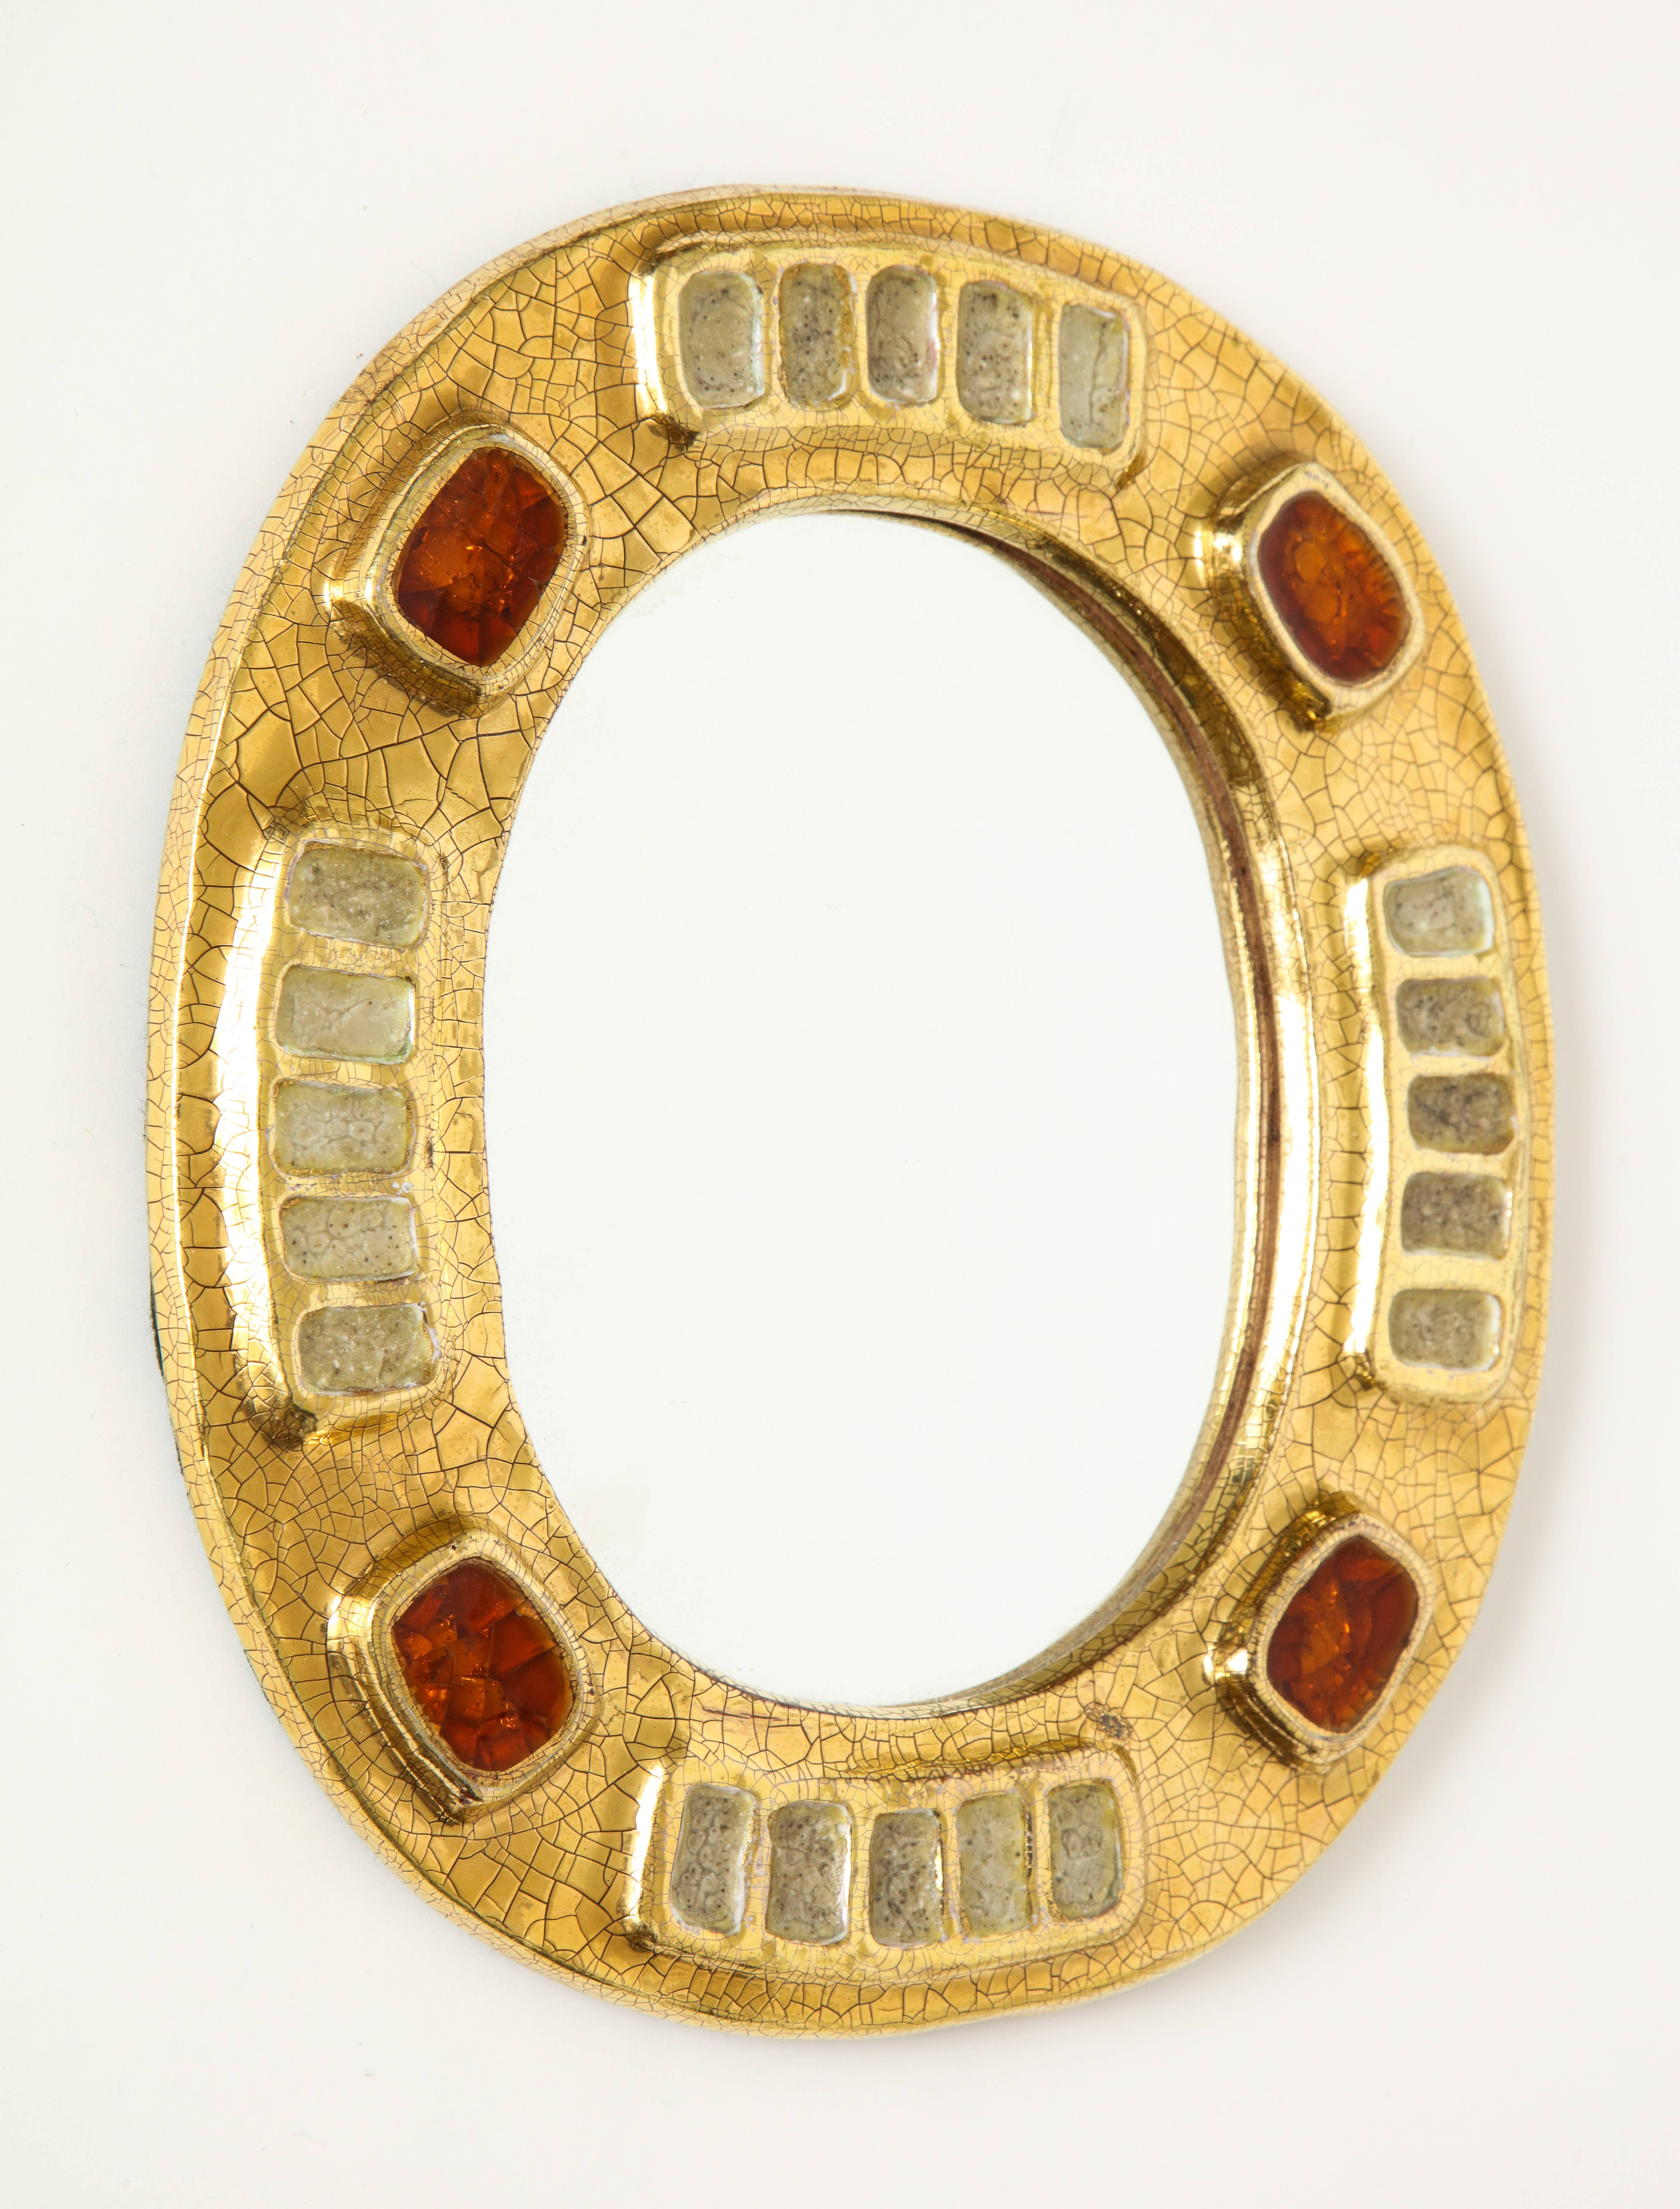 Mithé Espelt jewel mirror with gold and dark red enamel, France, 1970s.